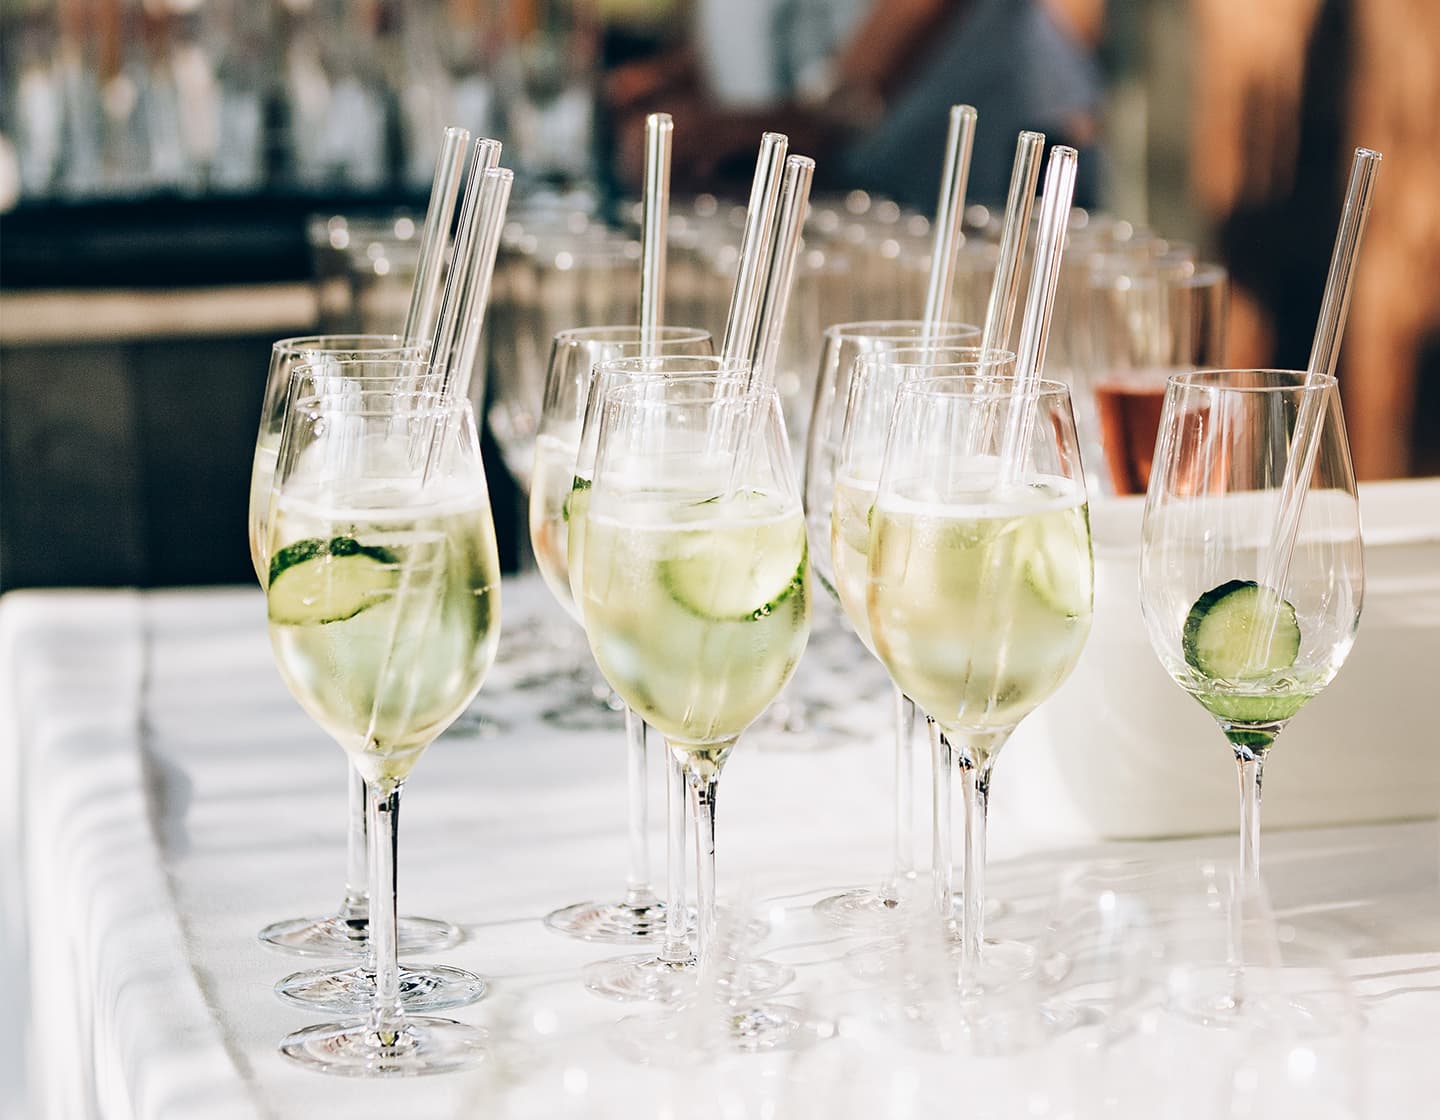 A group of identical apéritif glasses with glass straws and ice with a slice of cucumber.